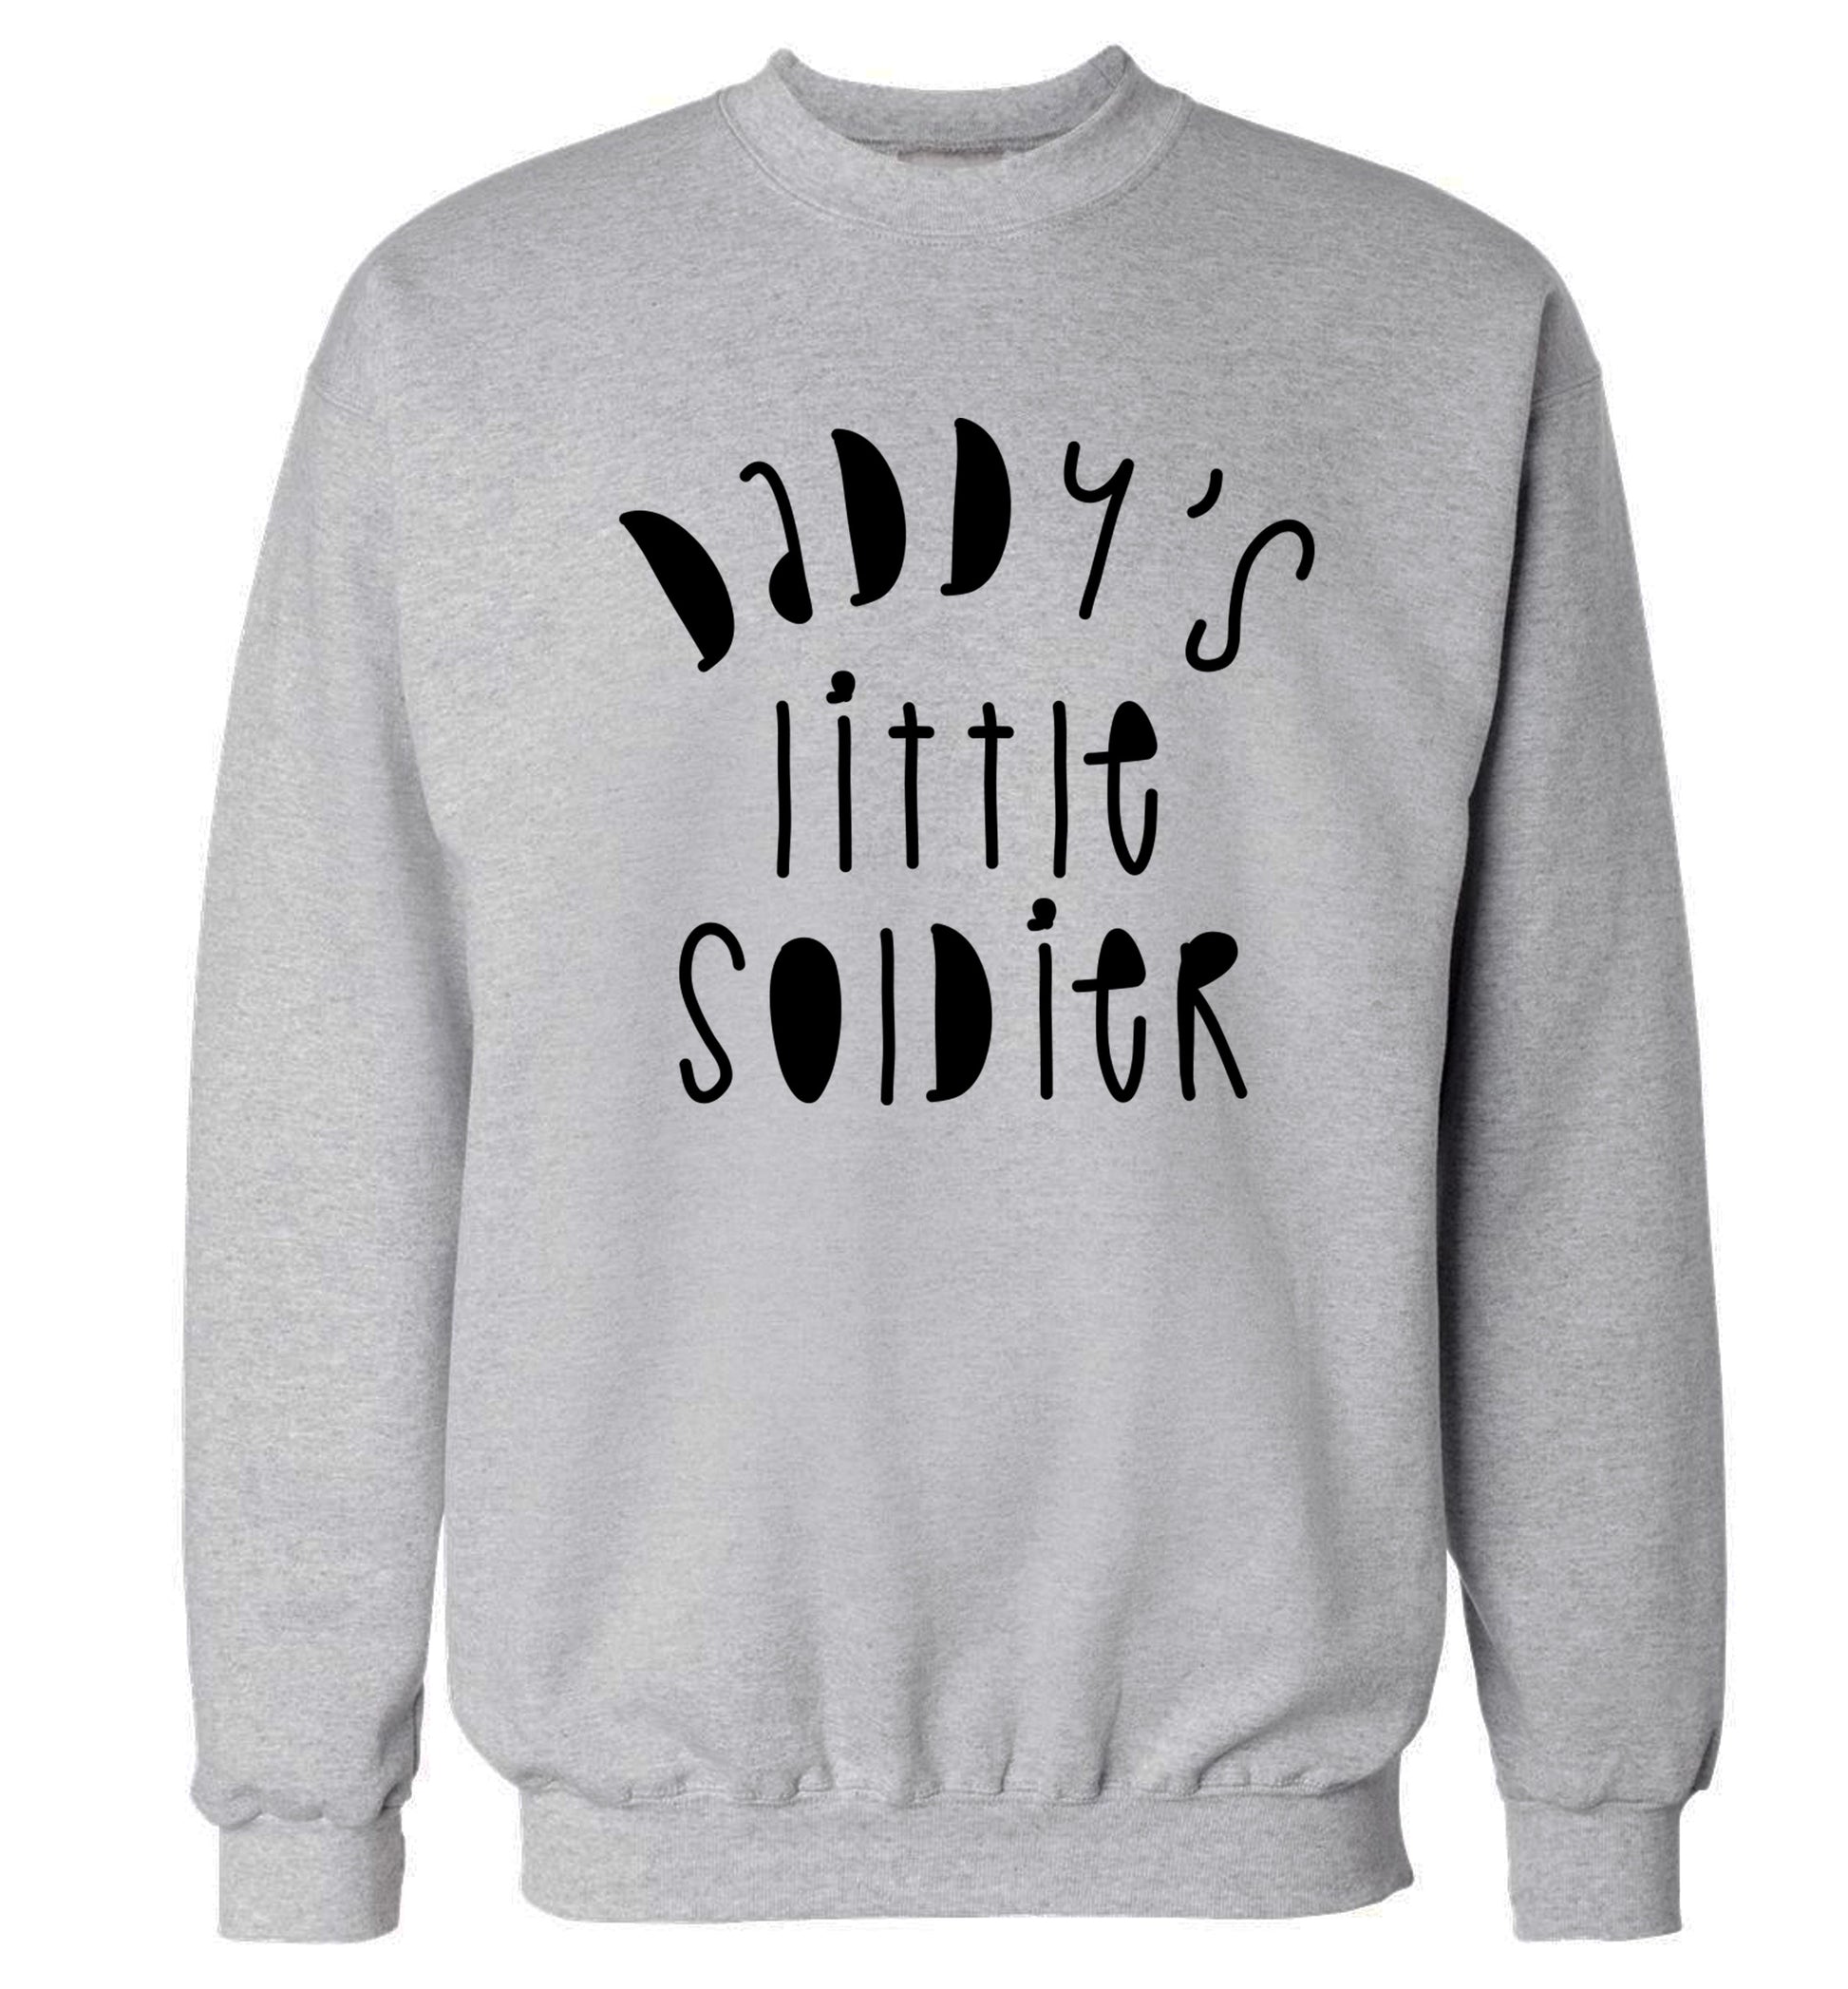 Daddy's little soldier Adult's unisex grey Sweater 2XL